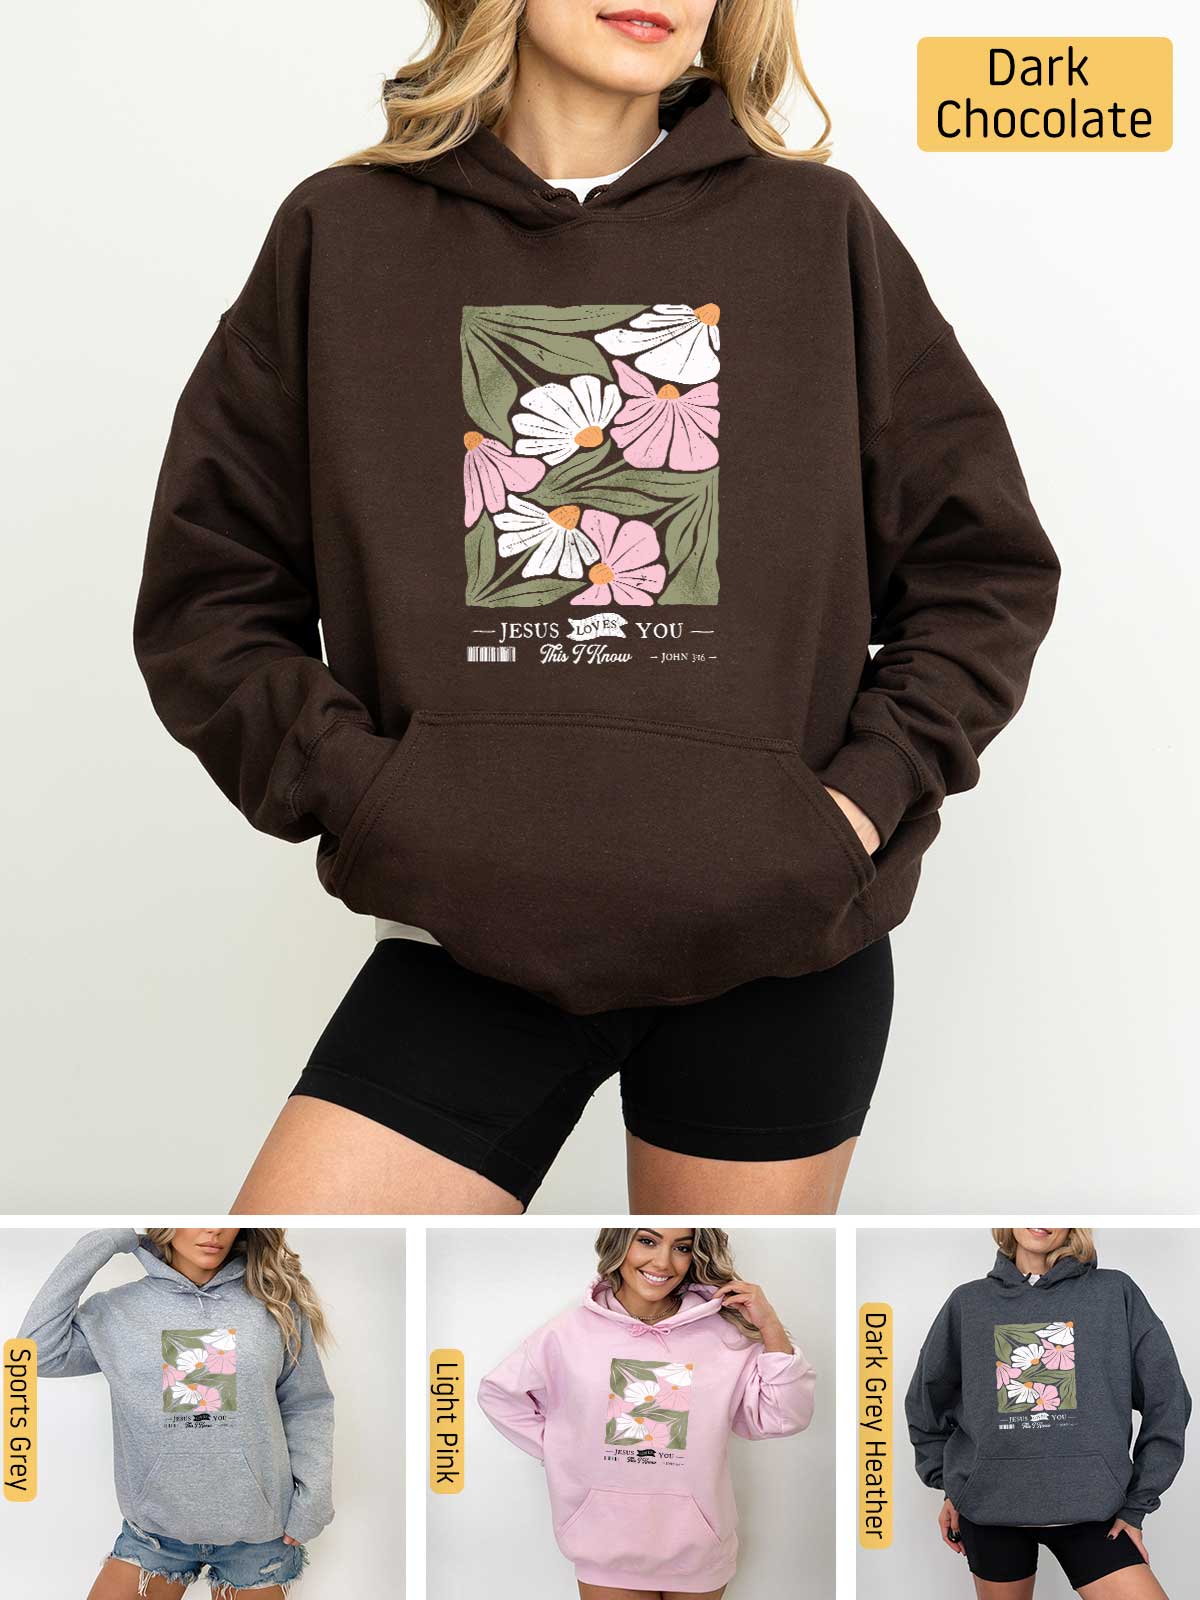 a woman wearing a hoodie with flowers on it